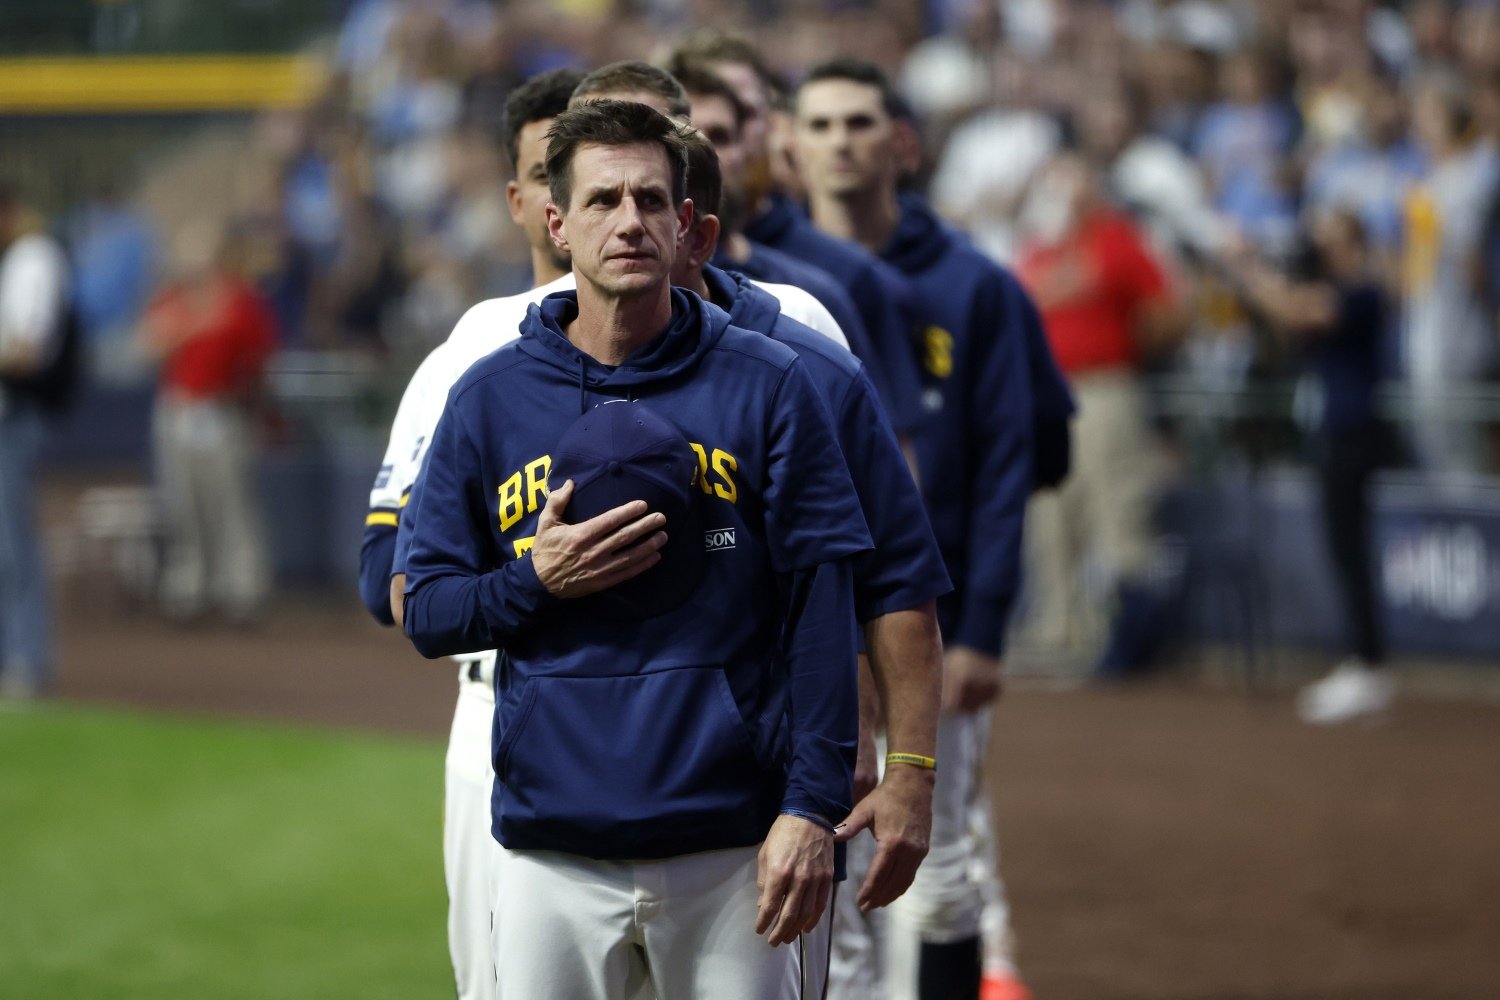 Craig Counsell to Set Milwaukee Brewers Record for Games as